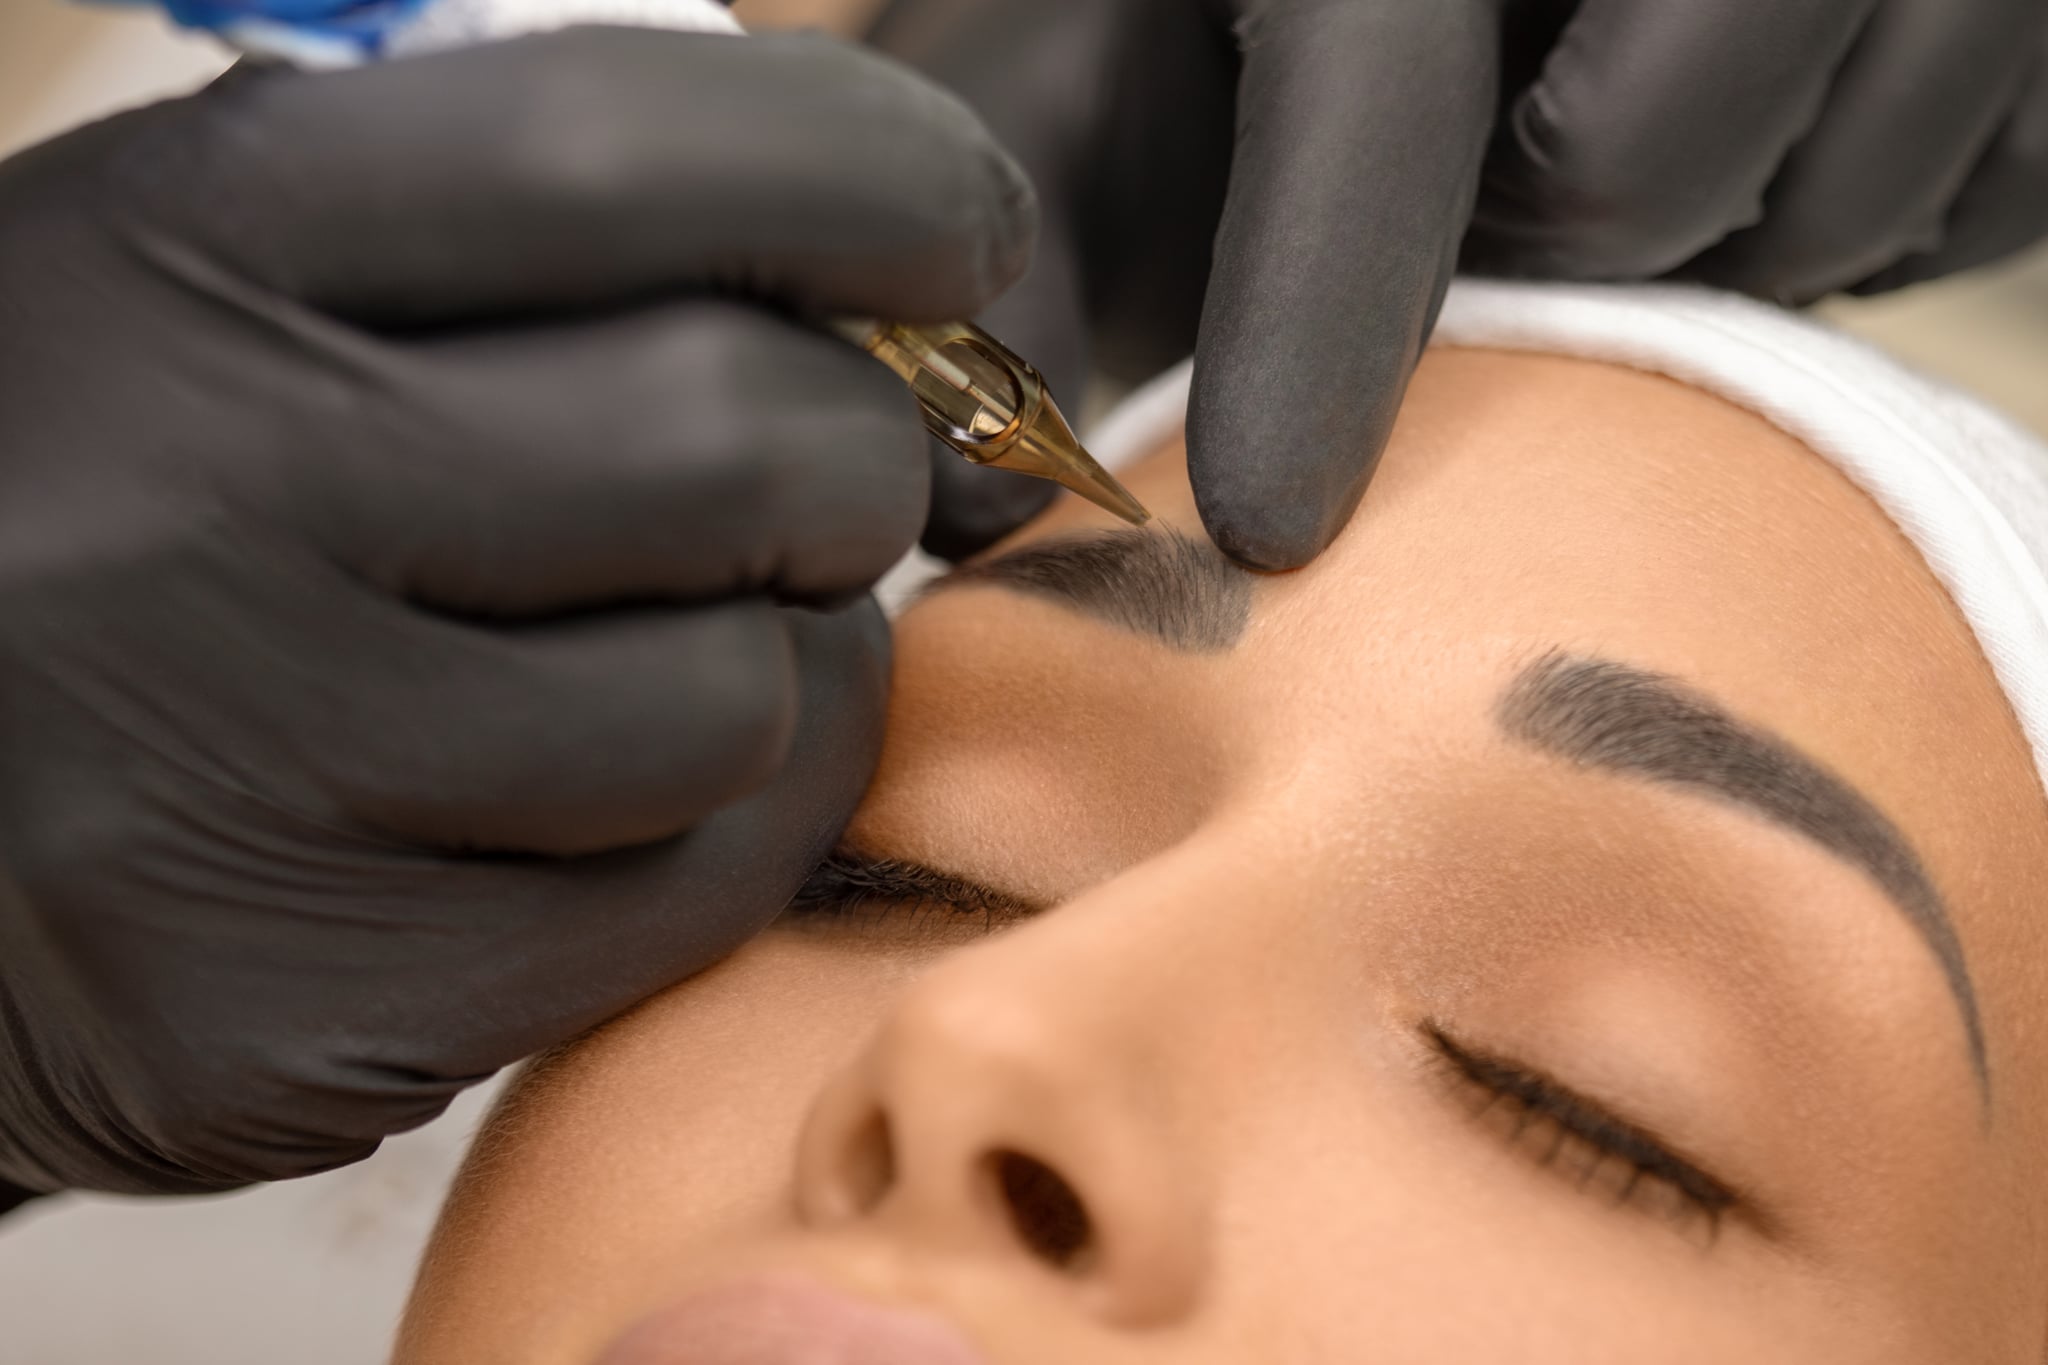 Make up artist applying permanent make up on eyebrows at beauty treatment. Beautician contouring and shading young woman's eyebrow with special tool.